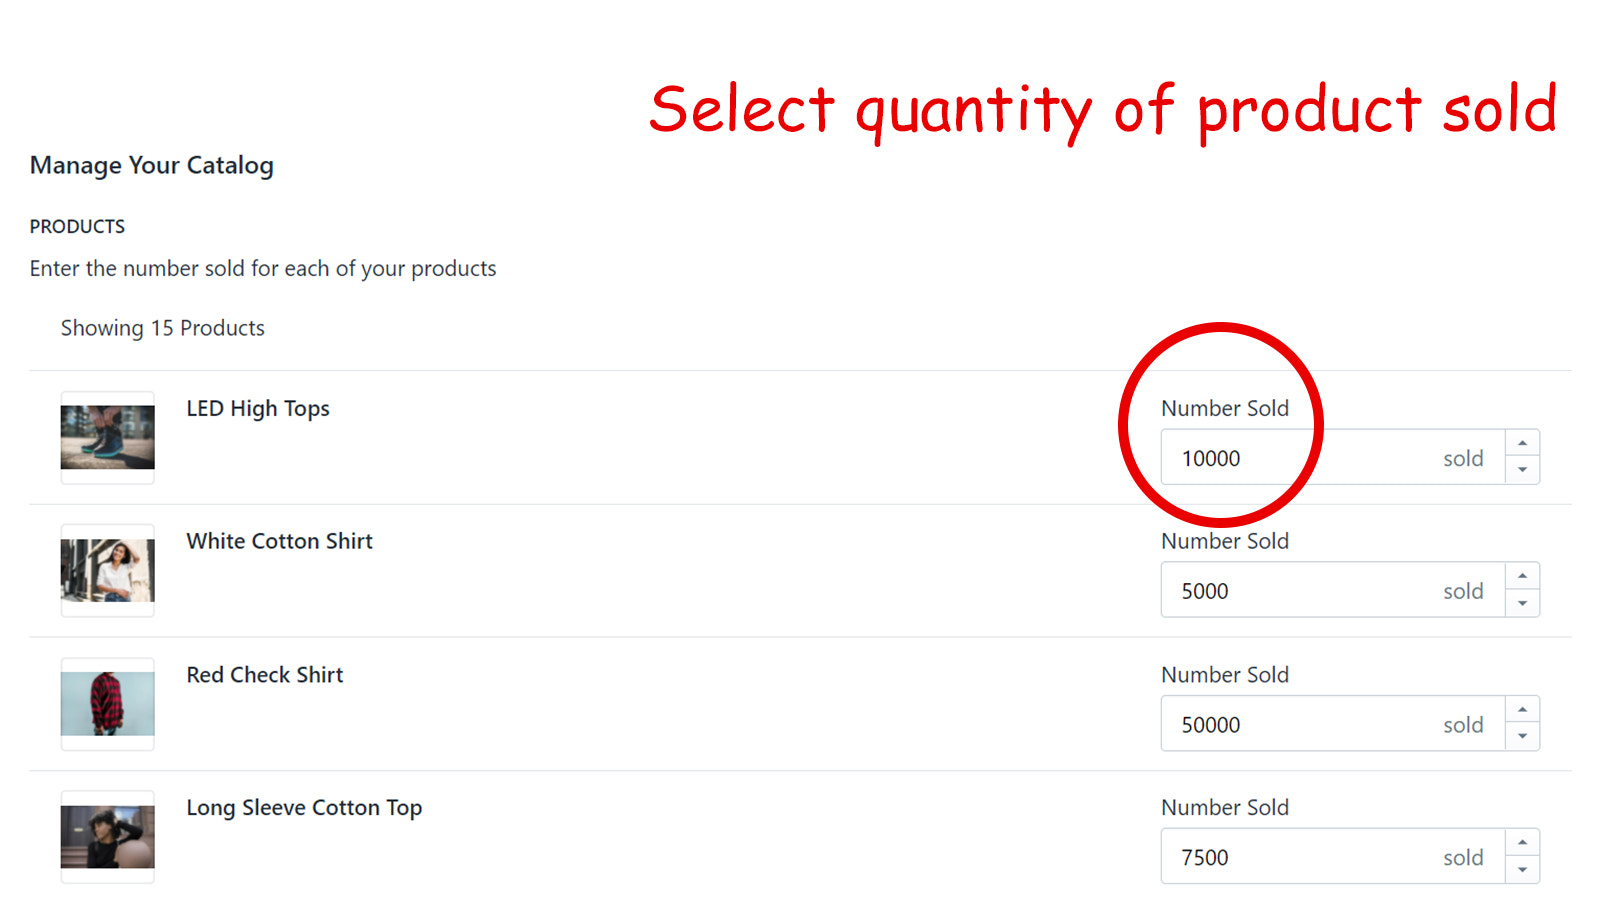 Select quantity of product sold